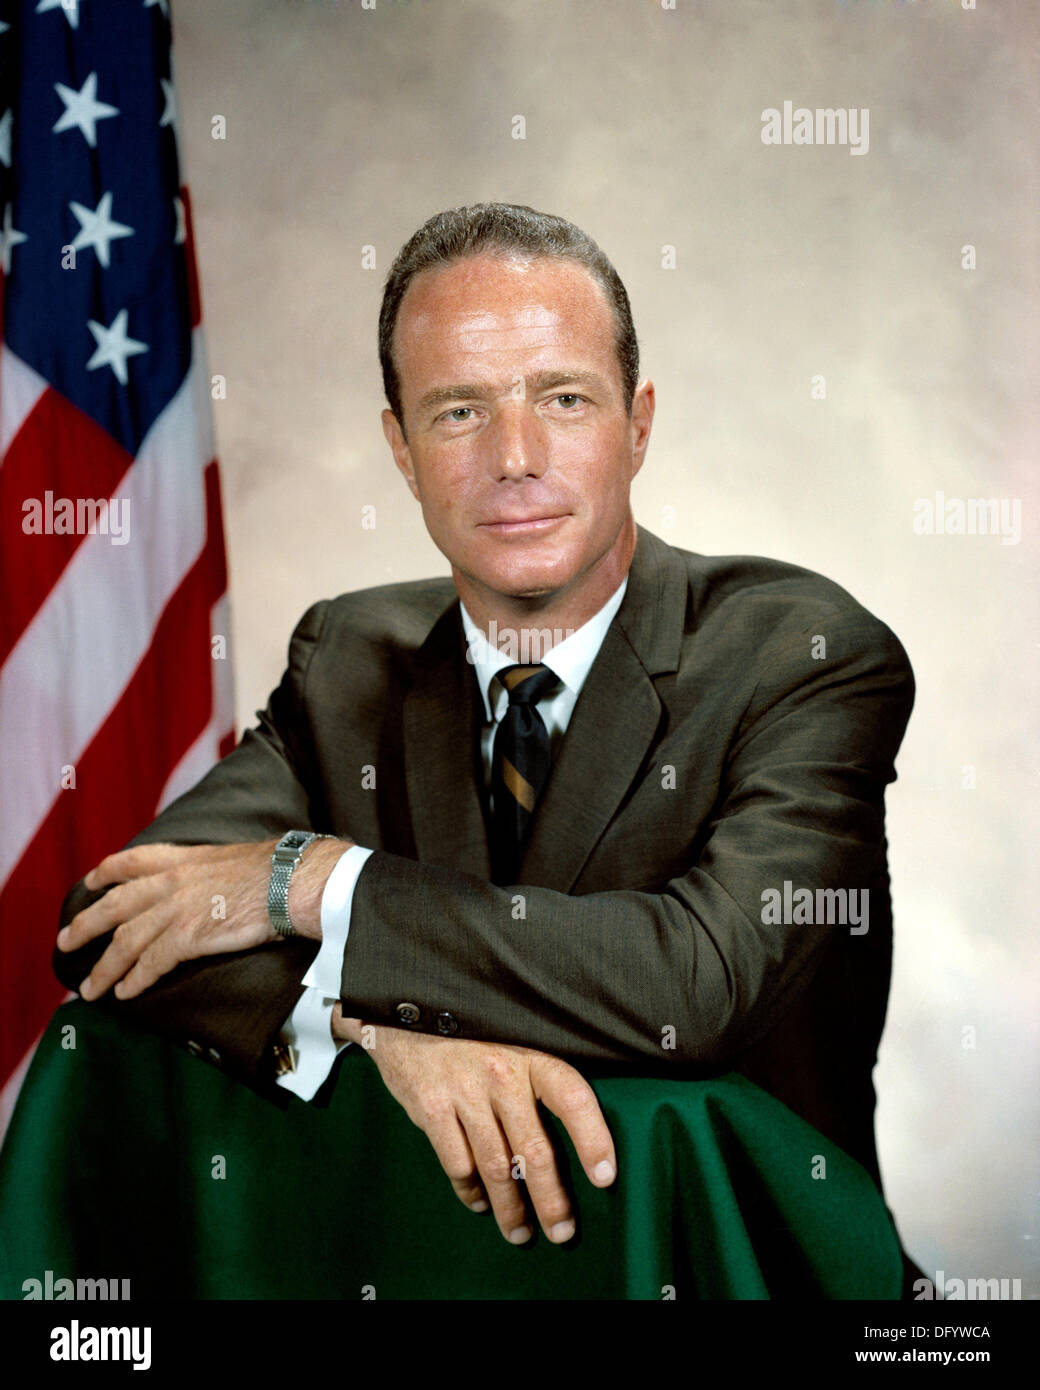 Portrait of NASA Astronaut Scott Carpenter October 22, 1964. Carpenter one of the original Mercury Seven astronauts and the second American to orbit the Earth died October 10, 2013 at age 88. Stock Photo